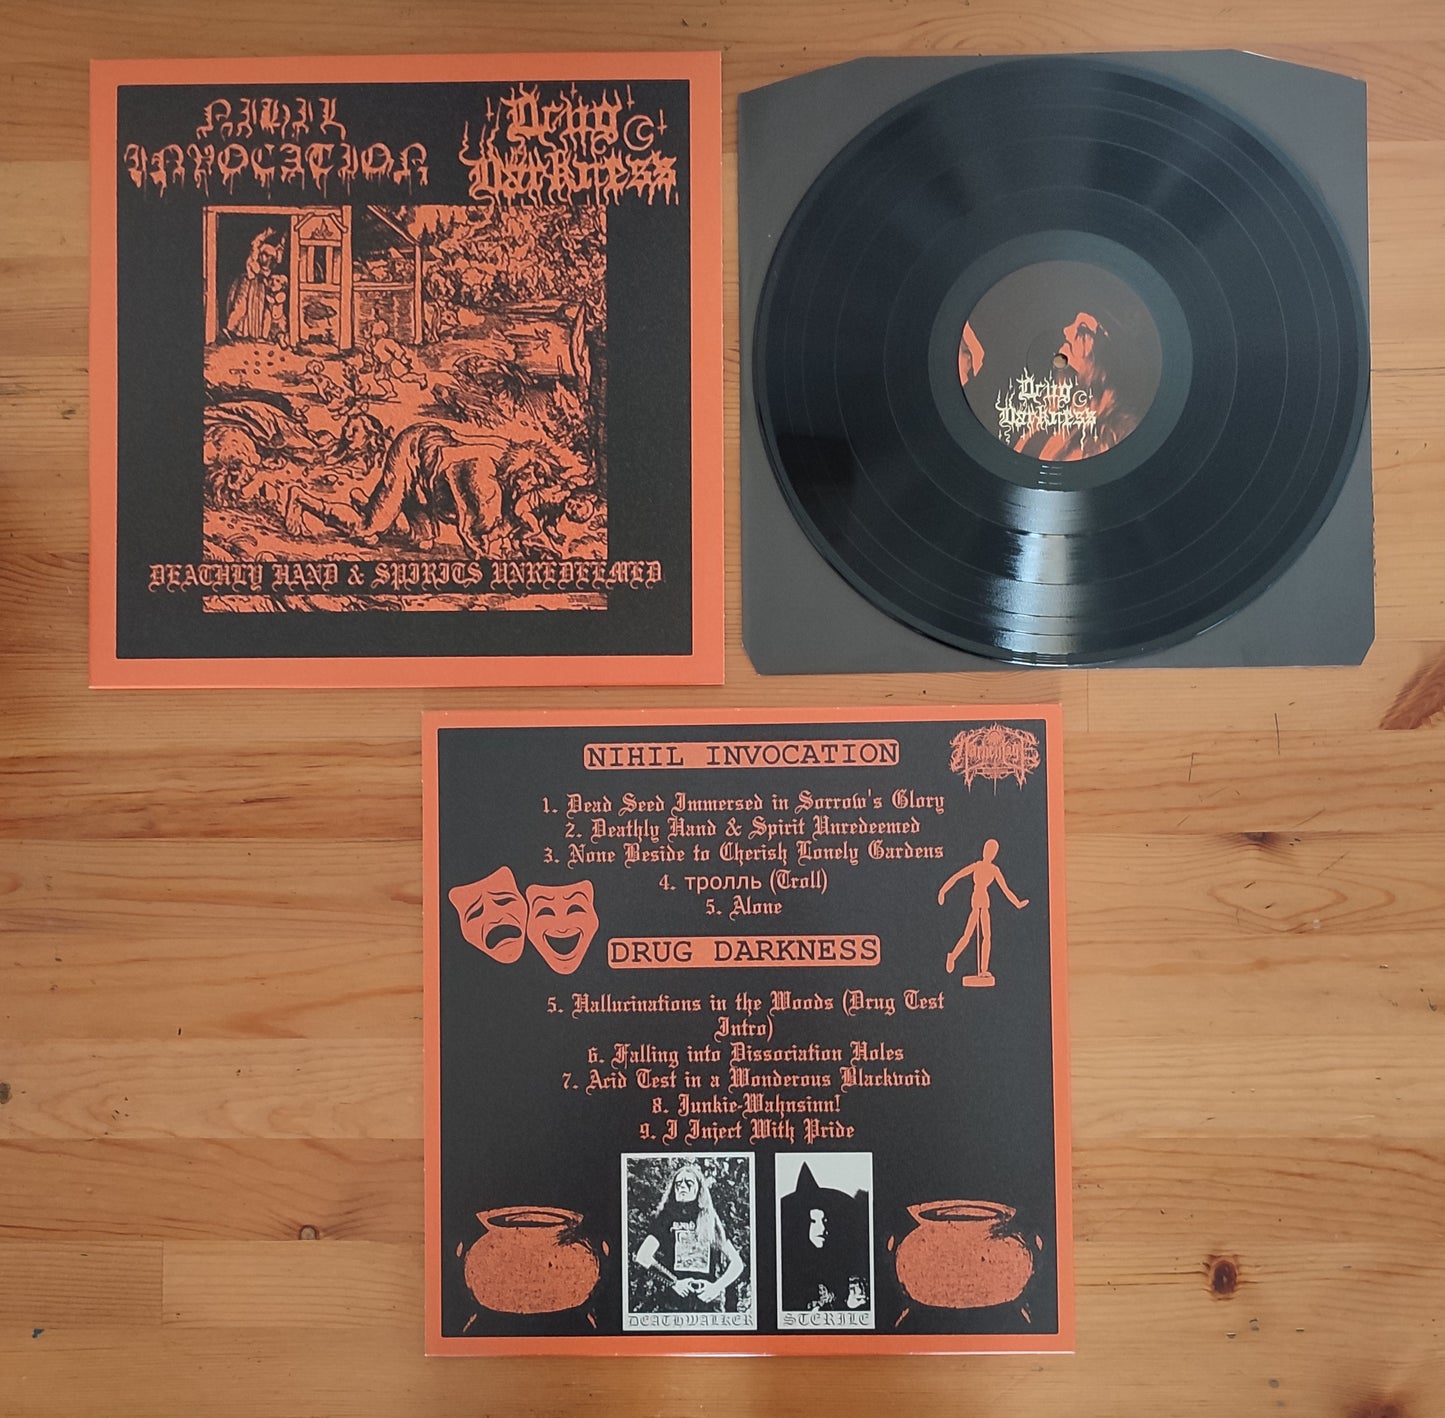 Nihil Invocation / Drug Darkness "Deathly Hand & Spirits Unredeemed" - 12" LP *New in Stock*